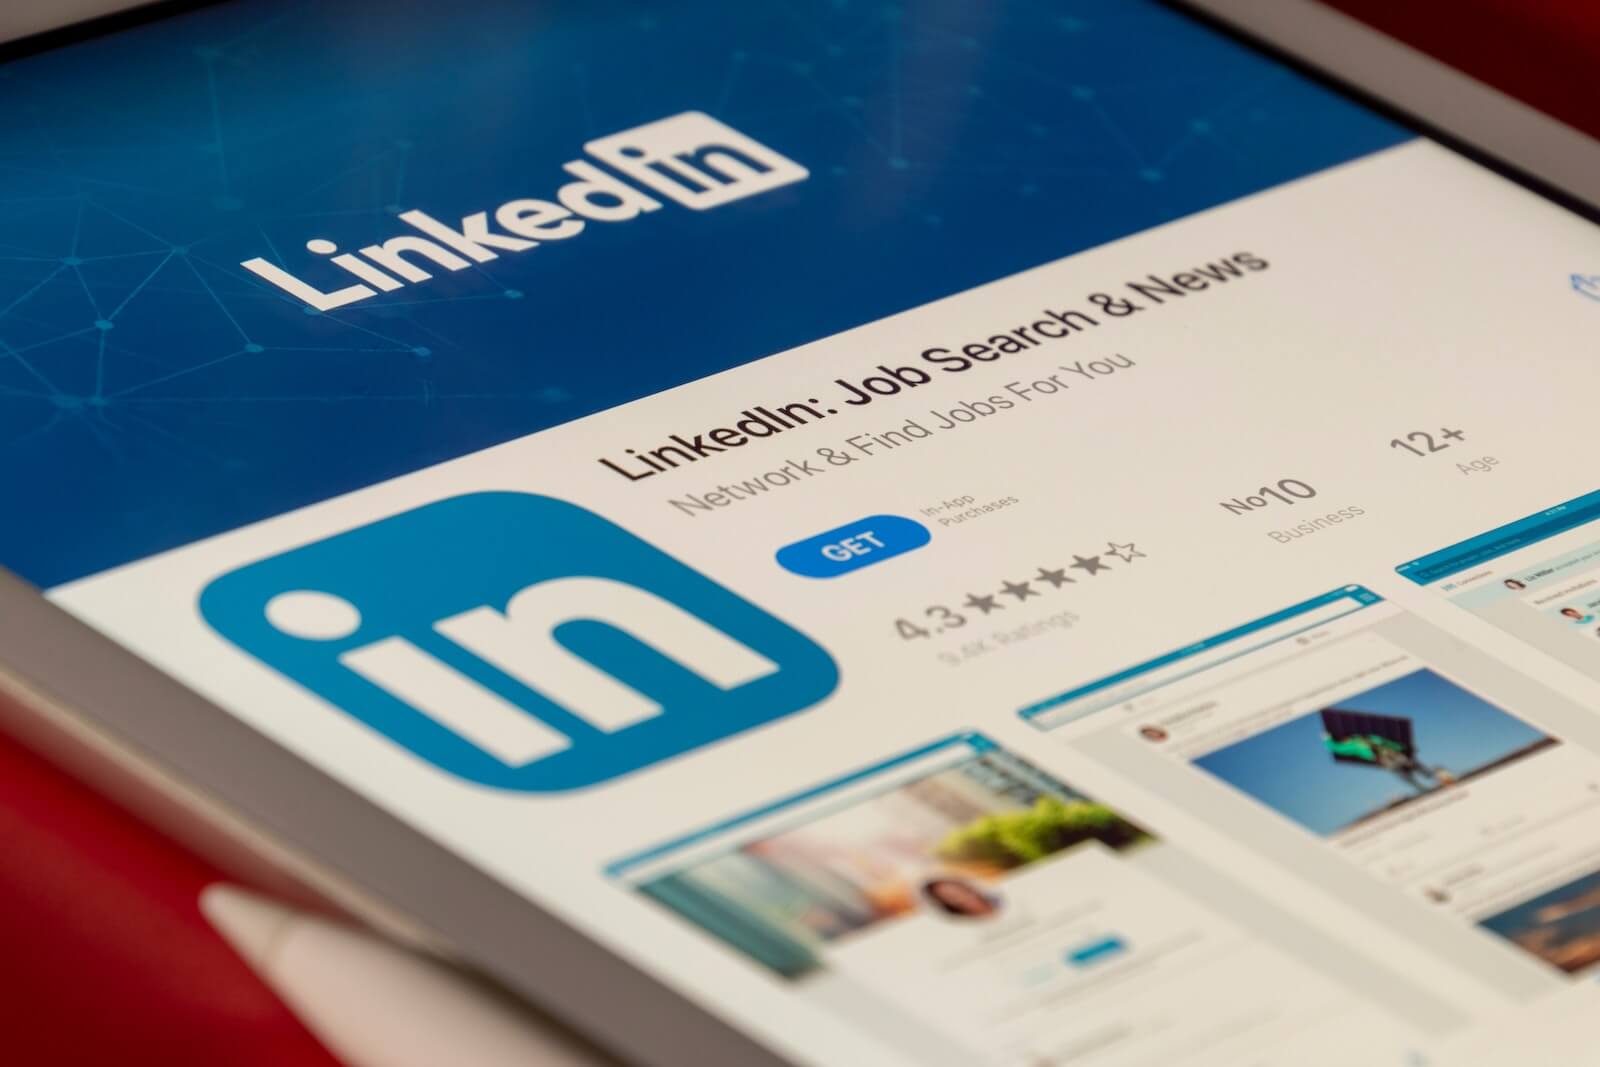 How to Use LinkedIn to Find a Job